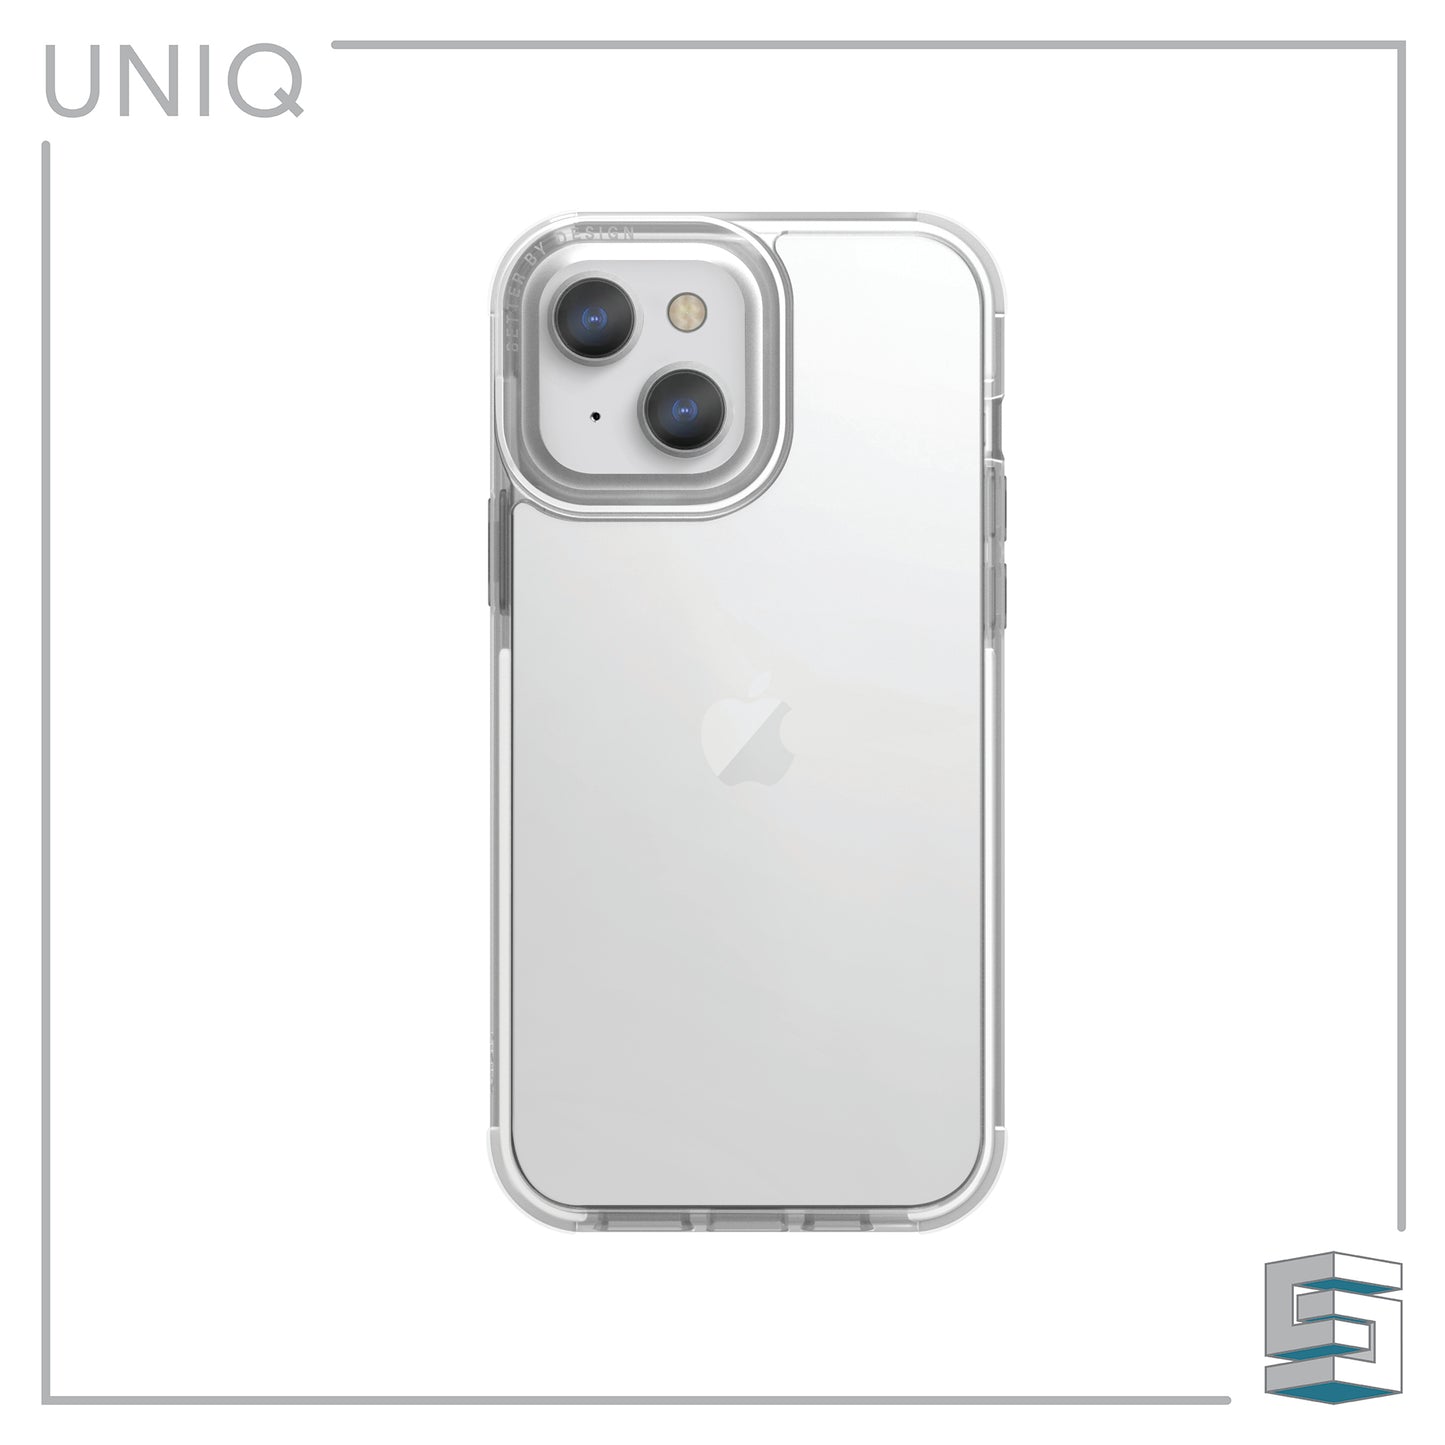 Case for Apple iPhone 13 series - UNIQ Combat Global Synergy Concepts